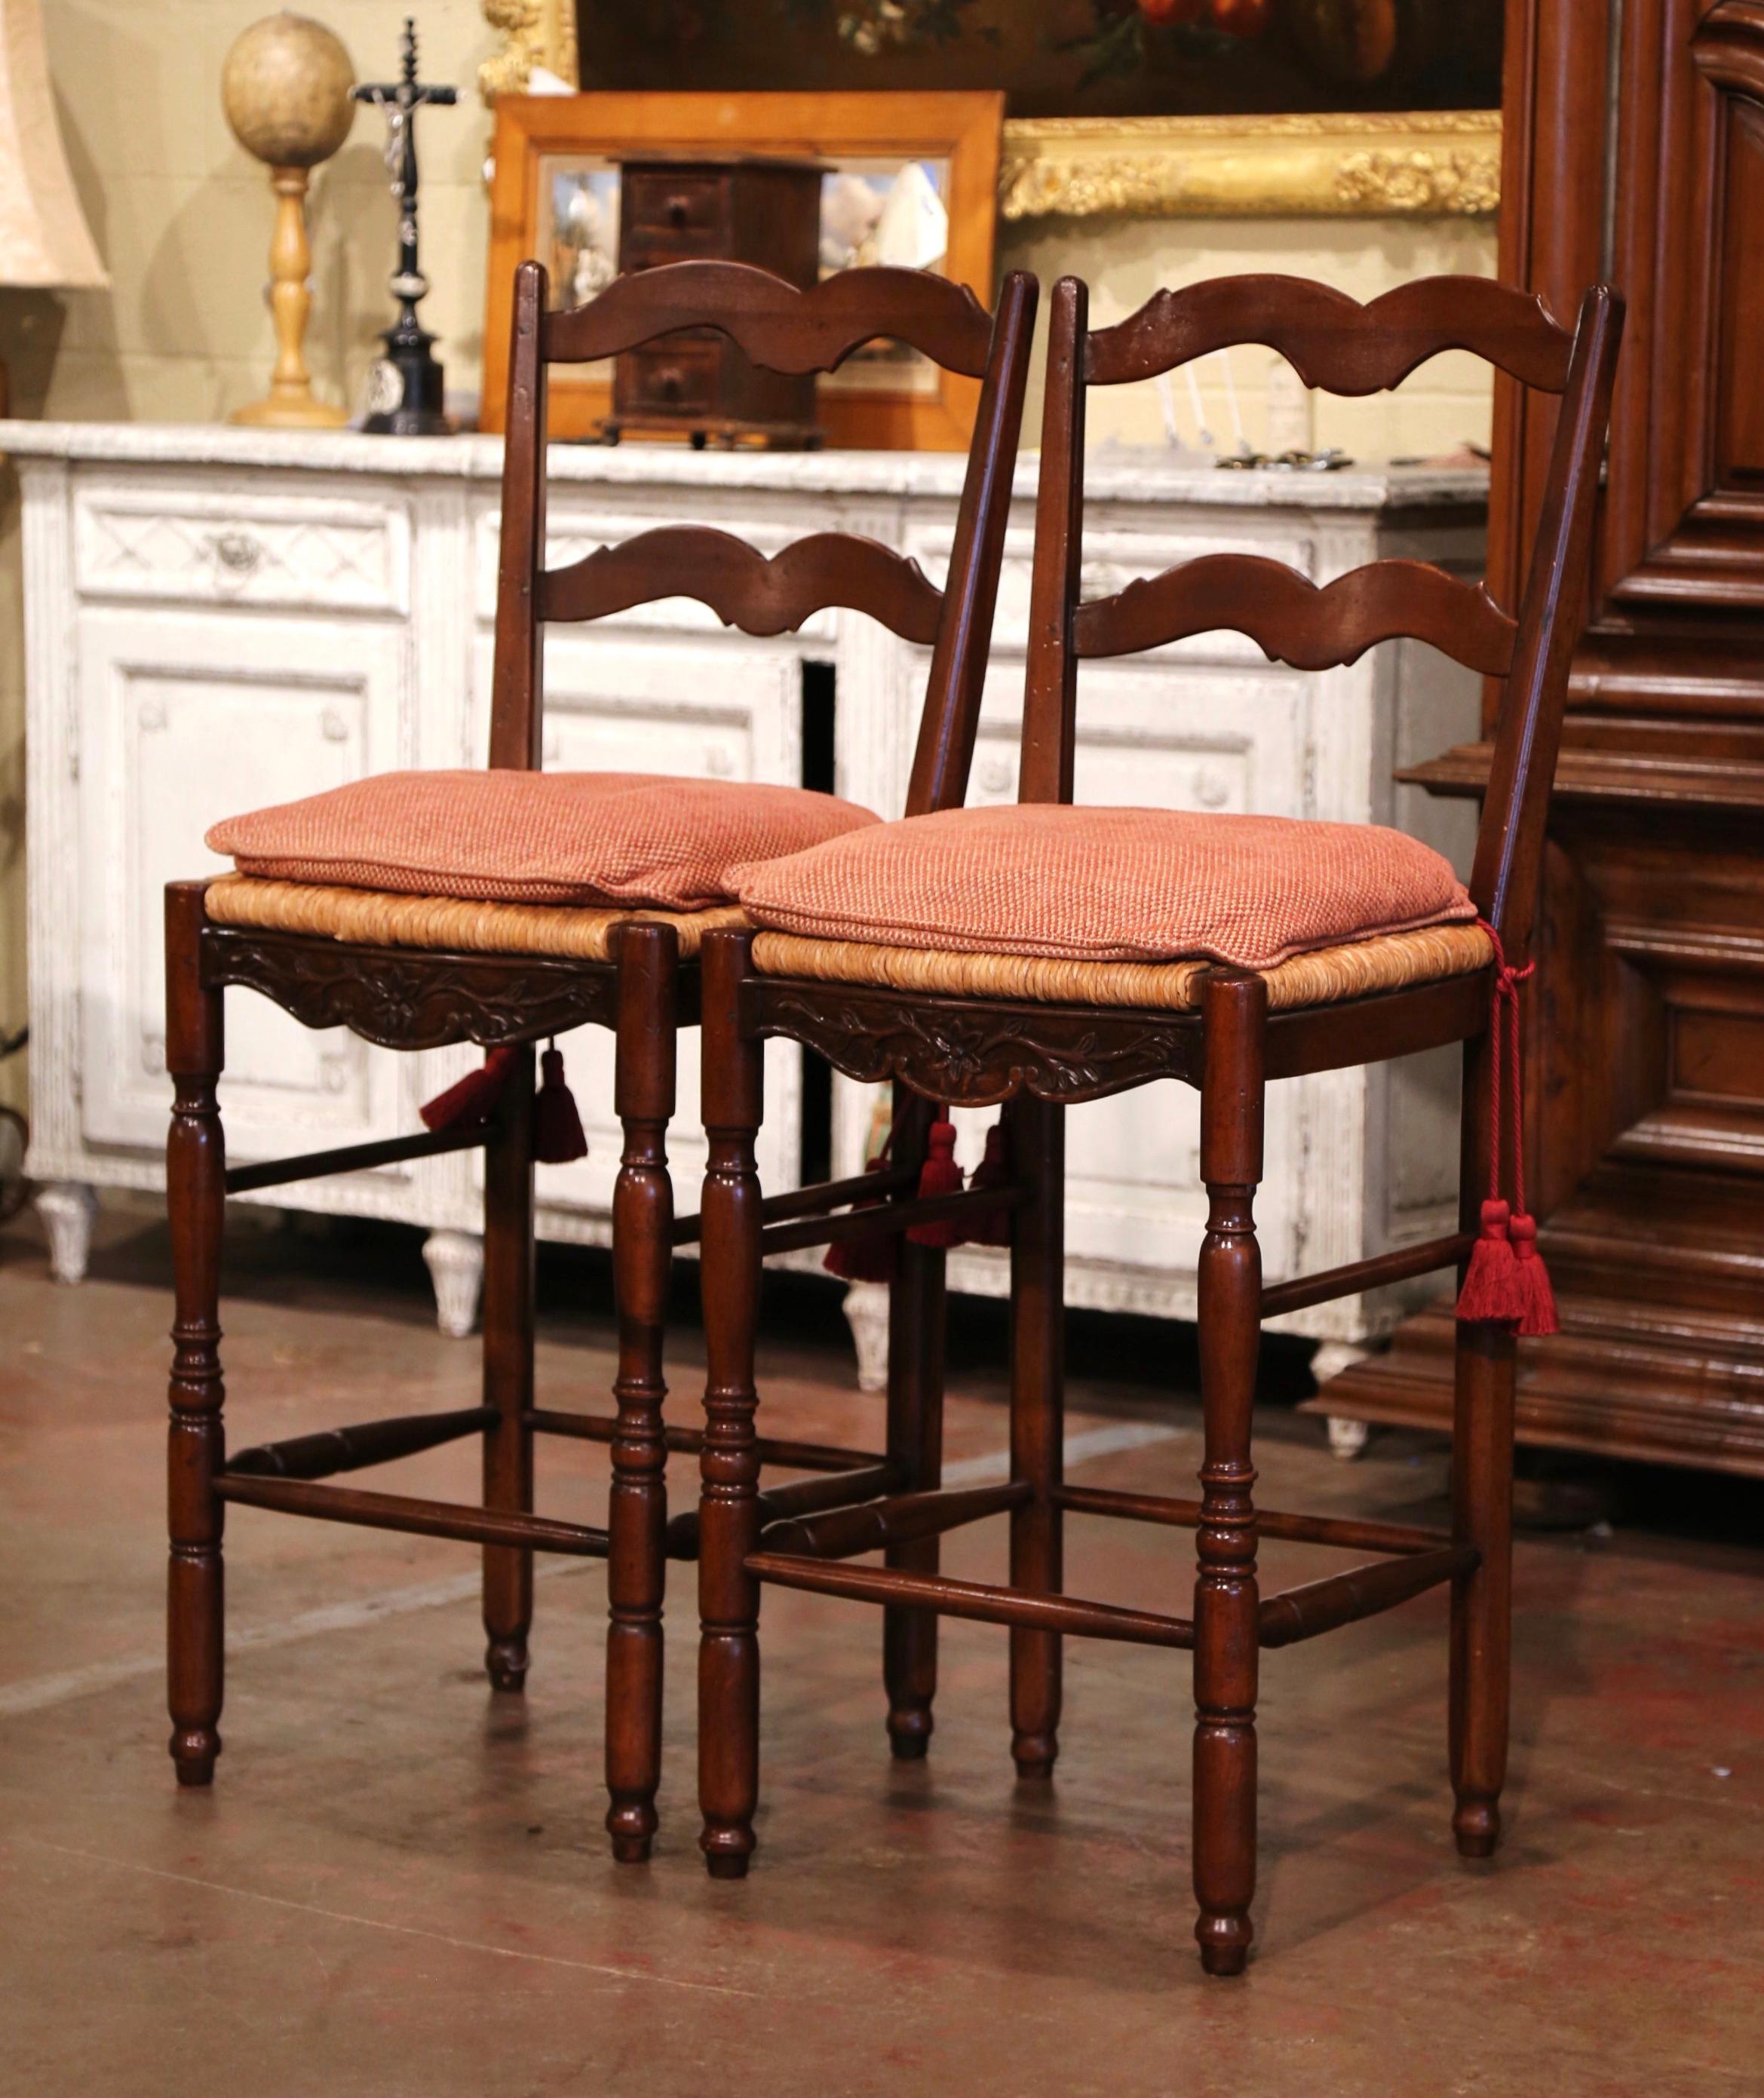 Place these stools around a kitchen bar counter for extra seating. Crafted in Normandy, France circa 2000, the Classic stools are 27” in seat height, the perfect height for a tall bar! Each two ladder back chair stands on turned legs with foot